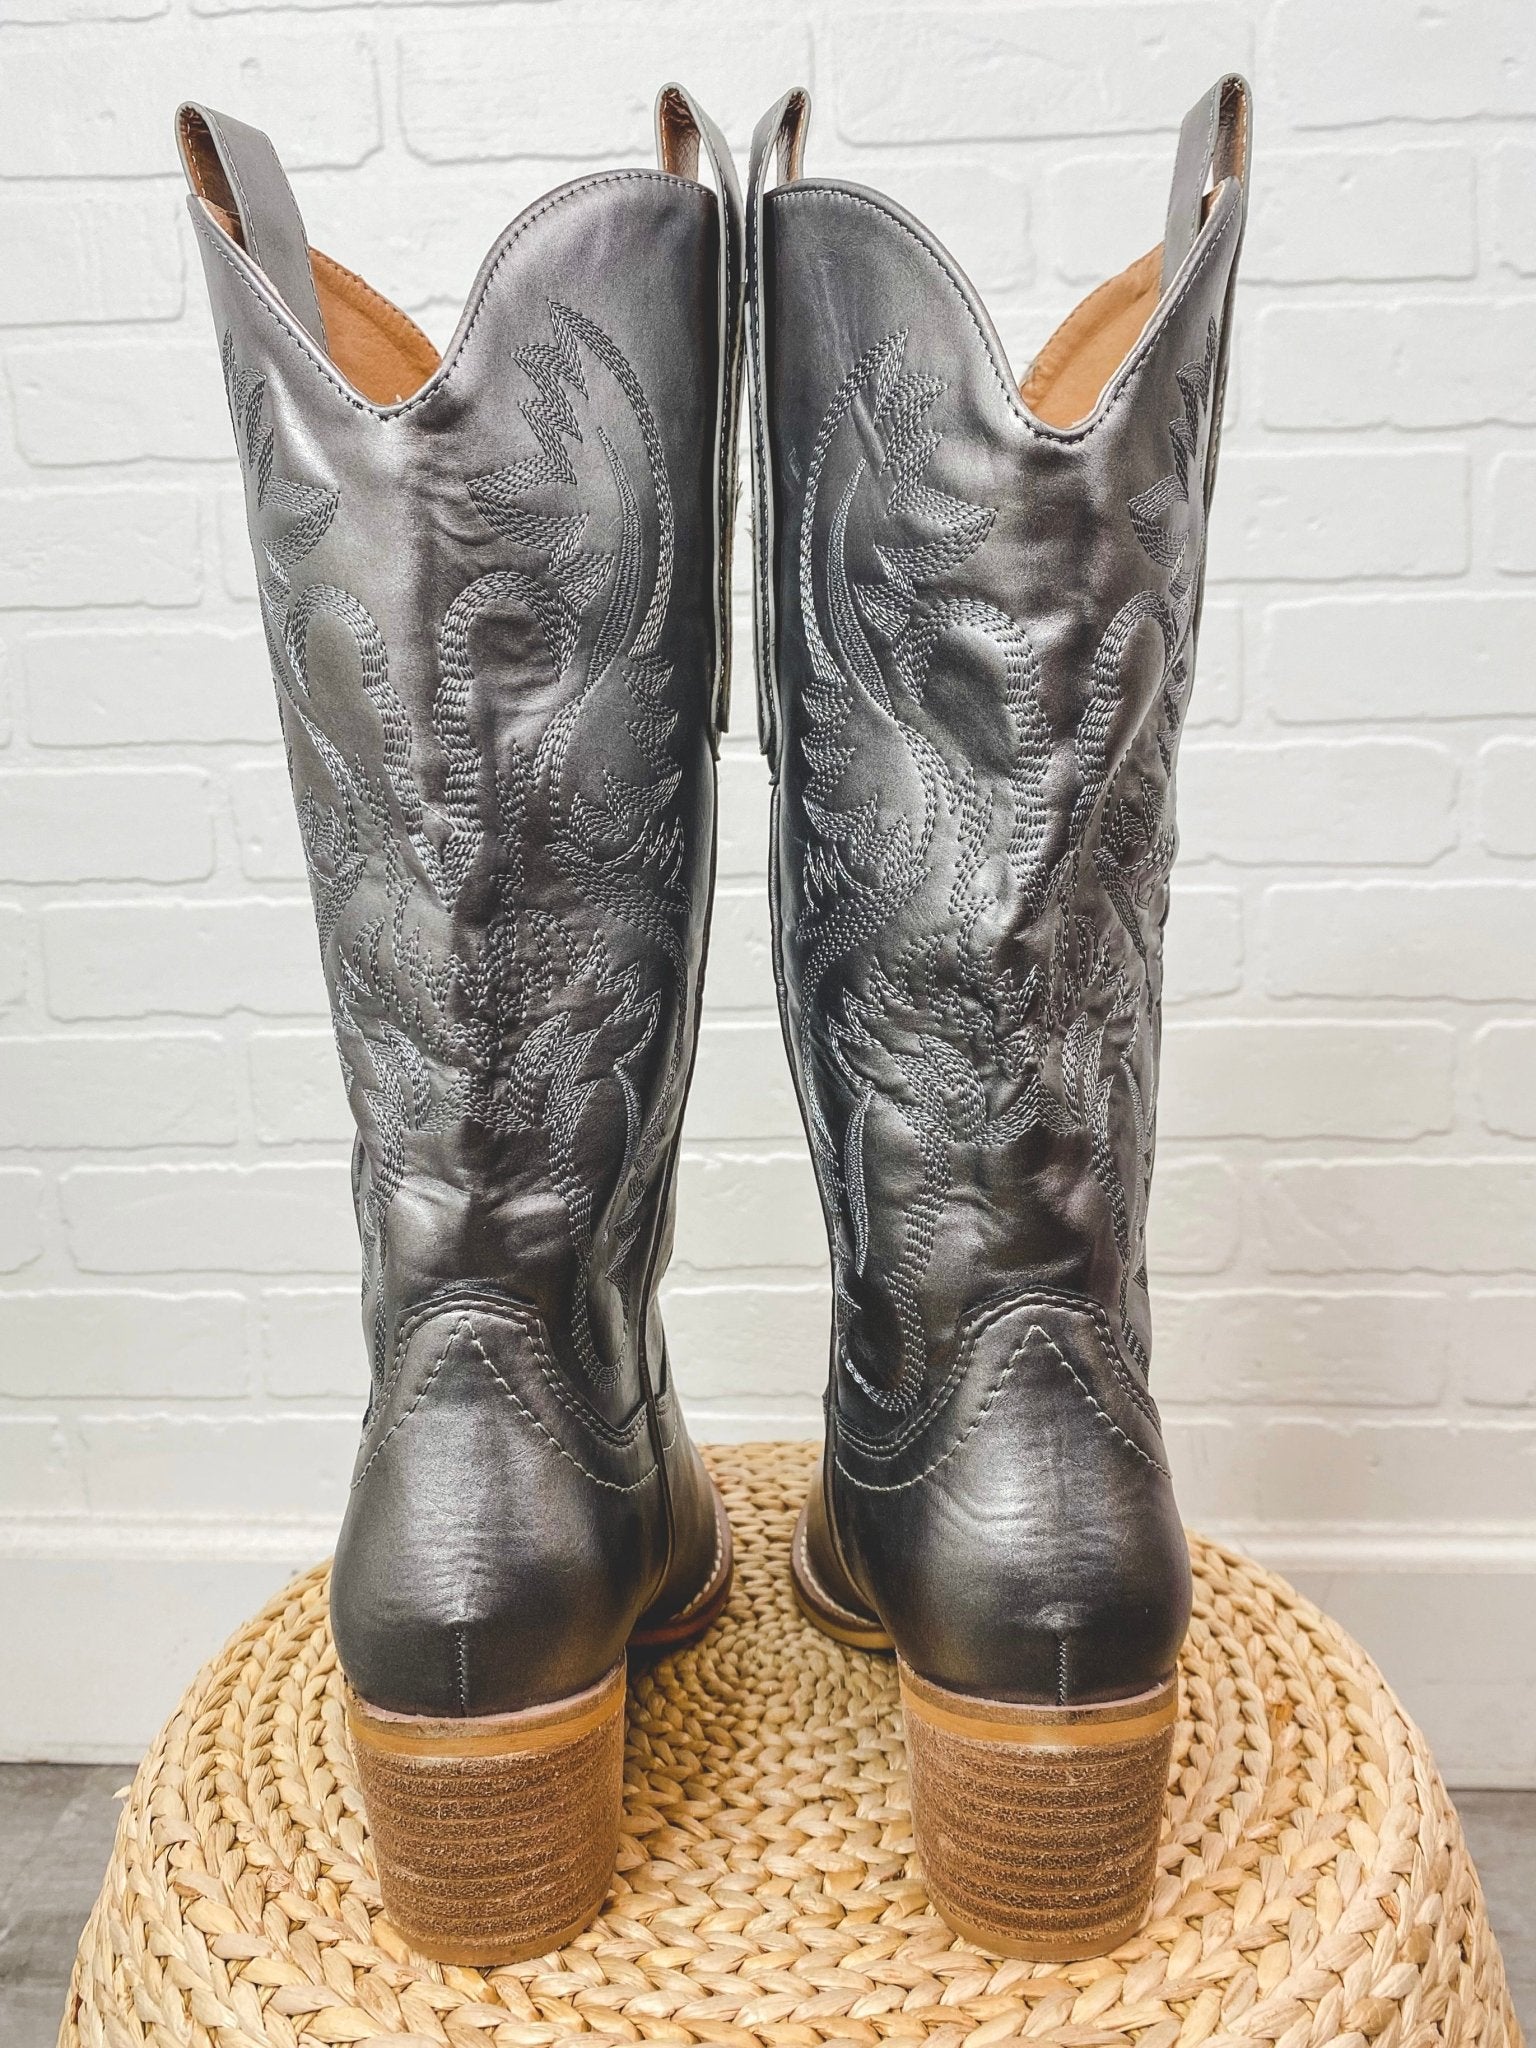 Hanan metallic cowboy boot pewter - Trendy New Year's Eve Dresses, Skirts, Kimonos and Sequins at Lush Fashion Lounge Boutique in Oklahoma City